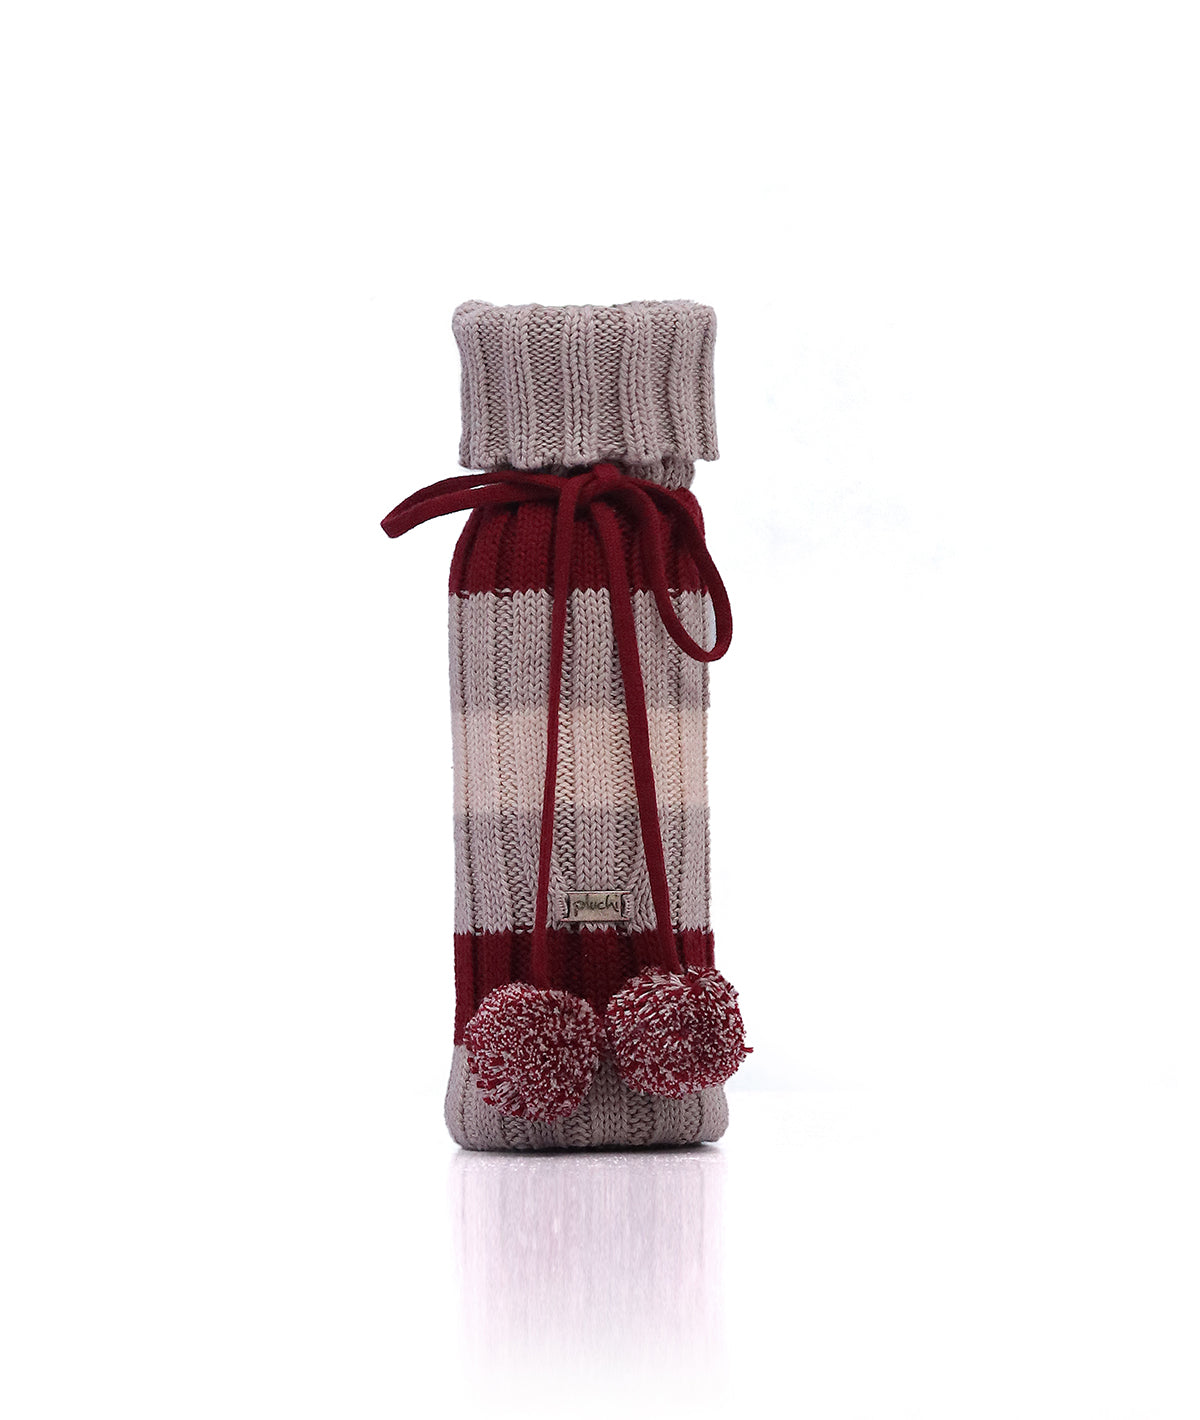 Classic Stripes Cotton Knitted Wine Bottle Cover (Beige Maroon Combo)